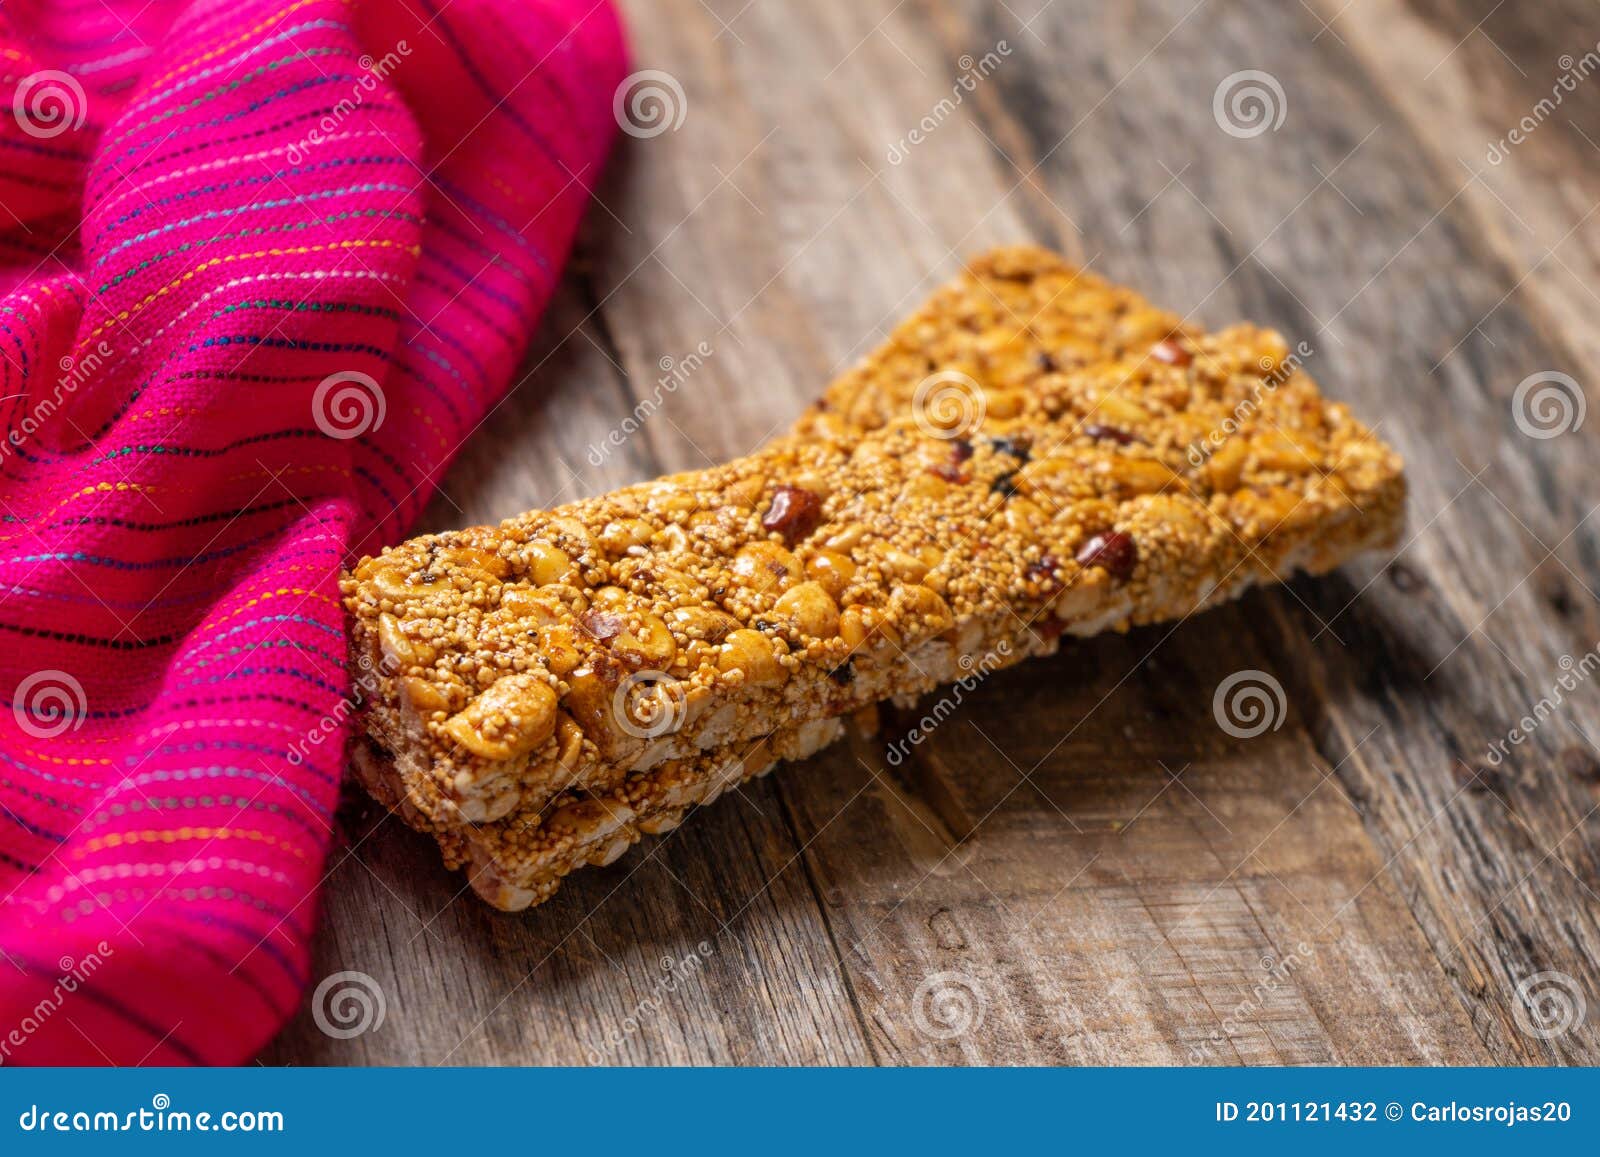 mexican amaranth bar with peanuts and honey also called alegria